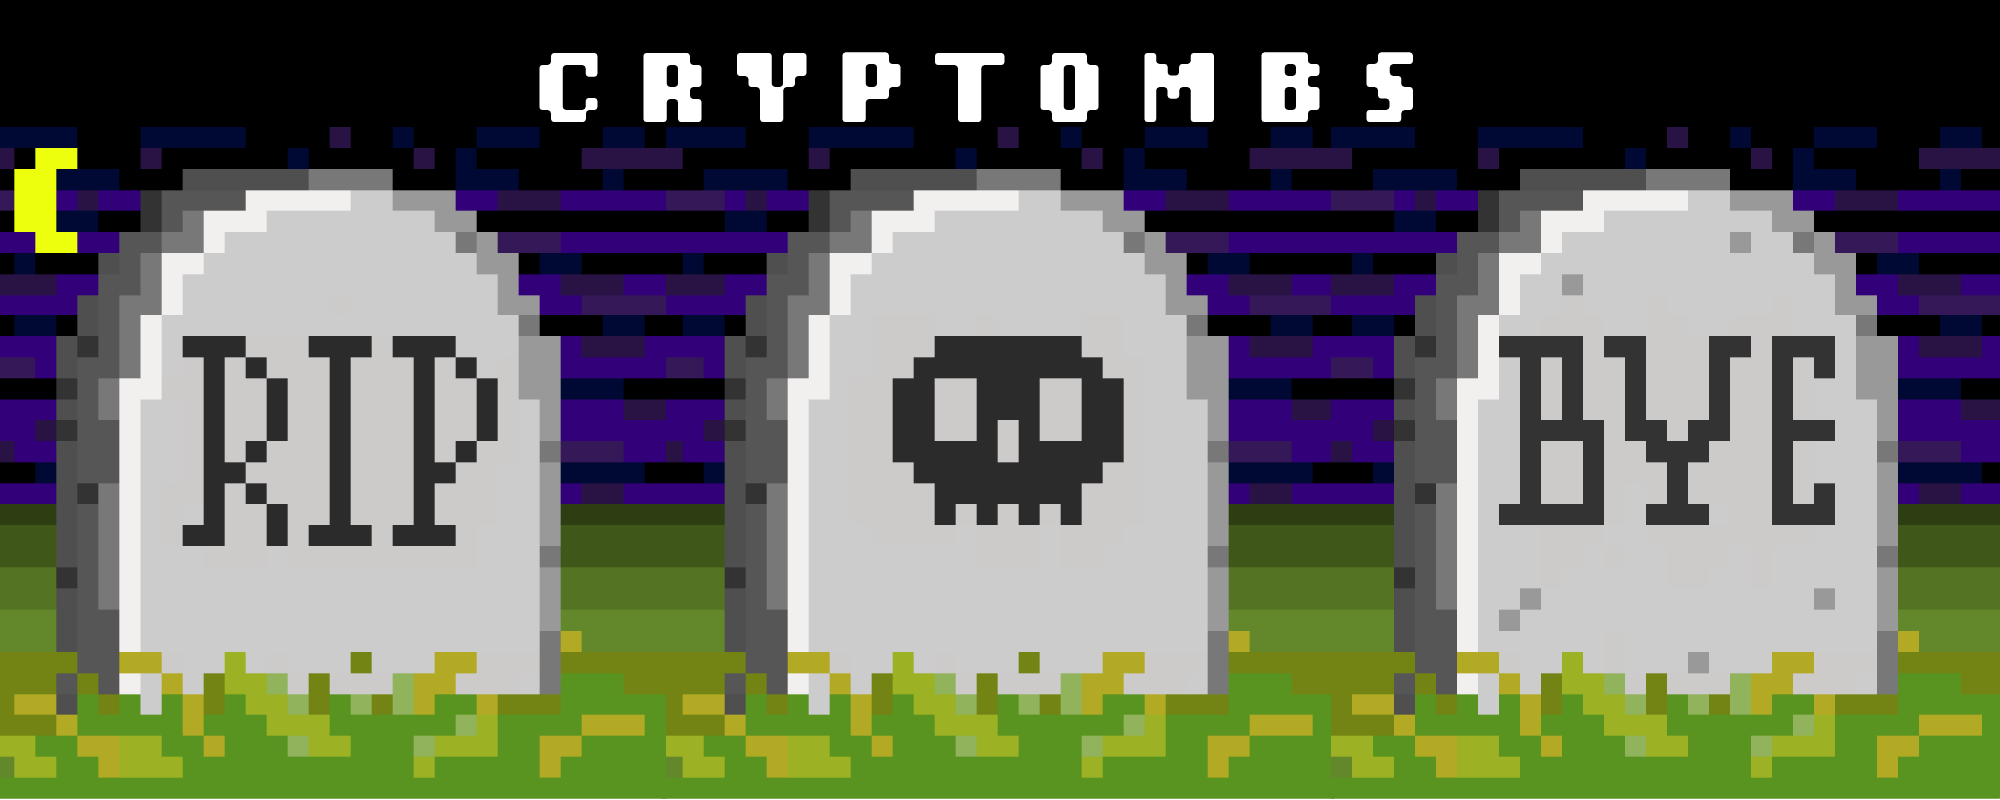 CRYPTOMBS banner